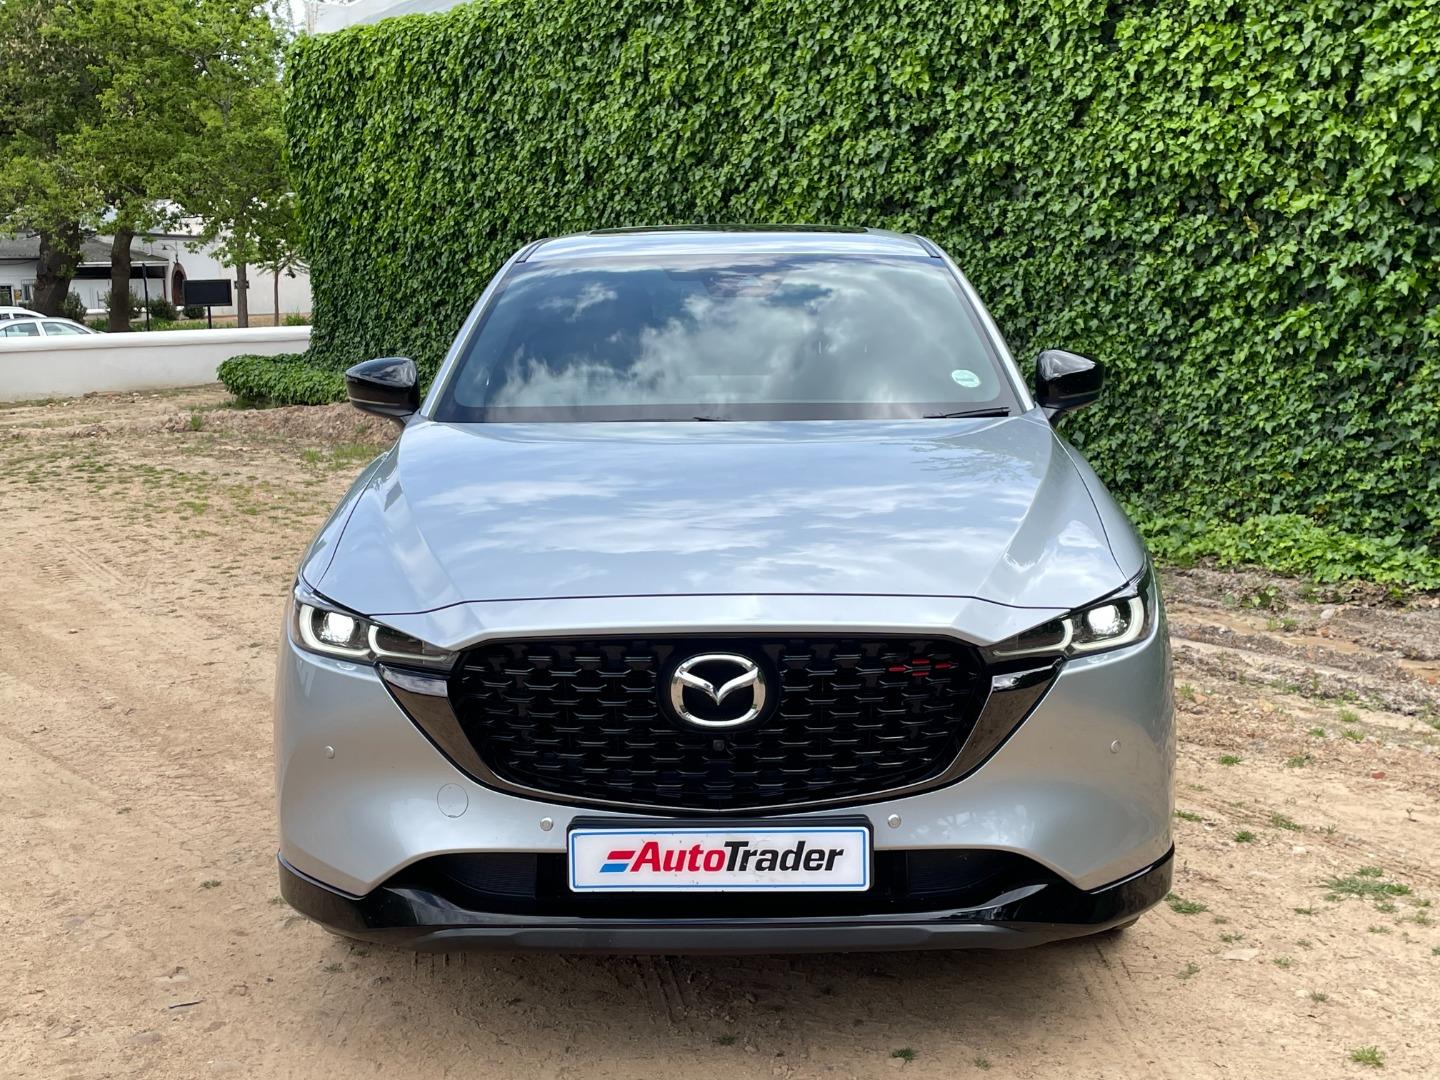 is the mazda cx-5 good for new drivers?